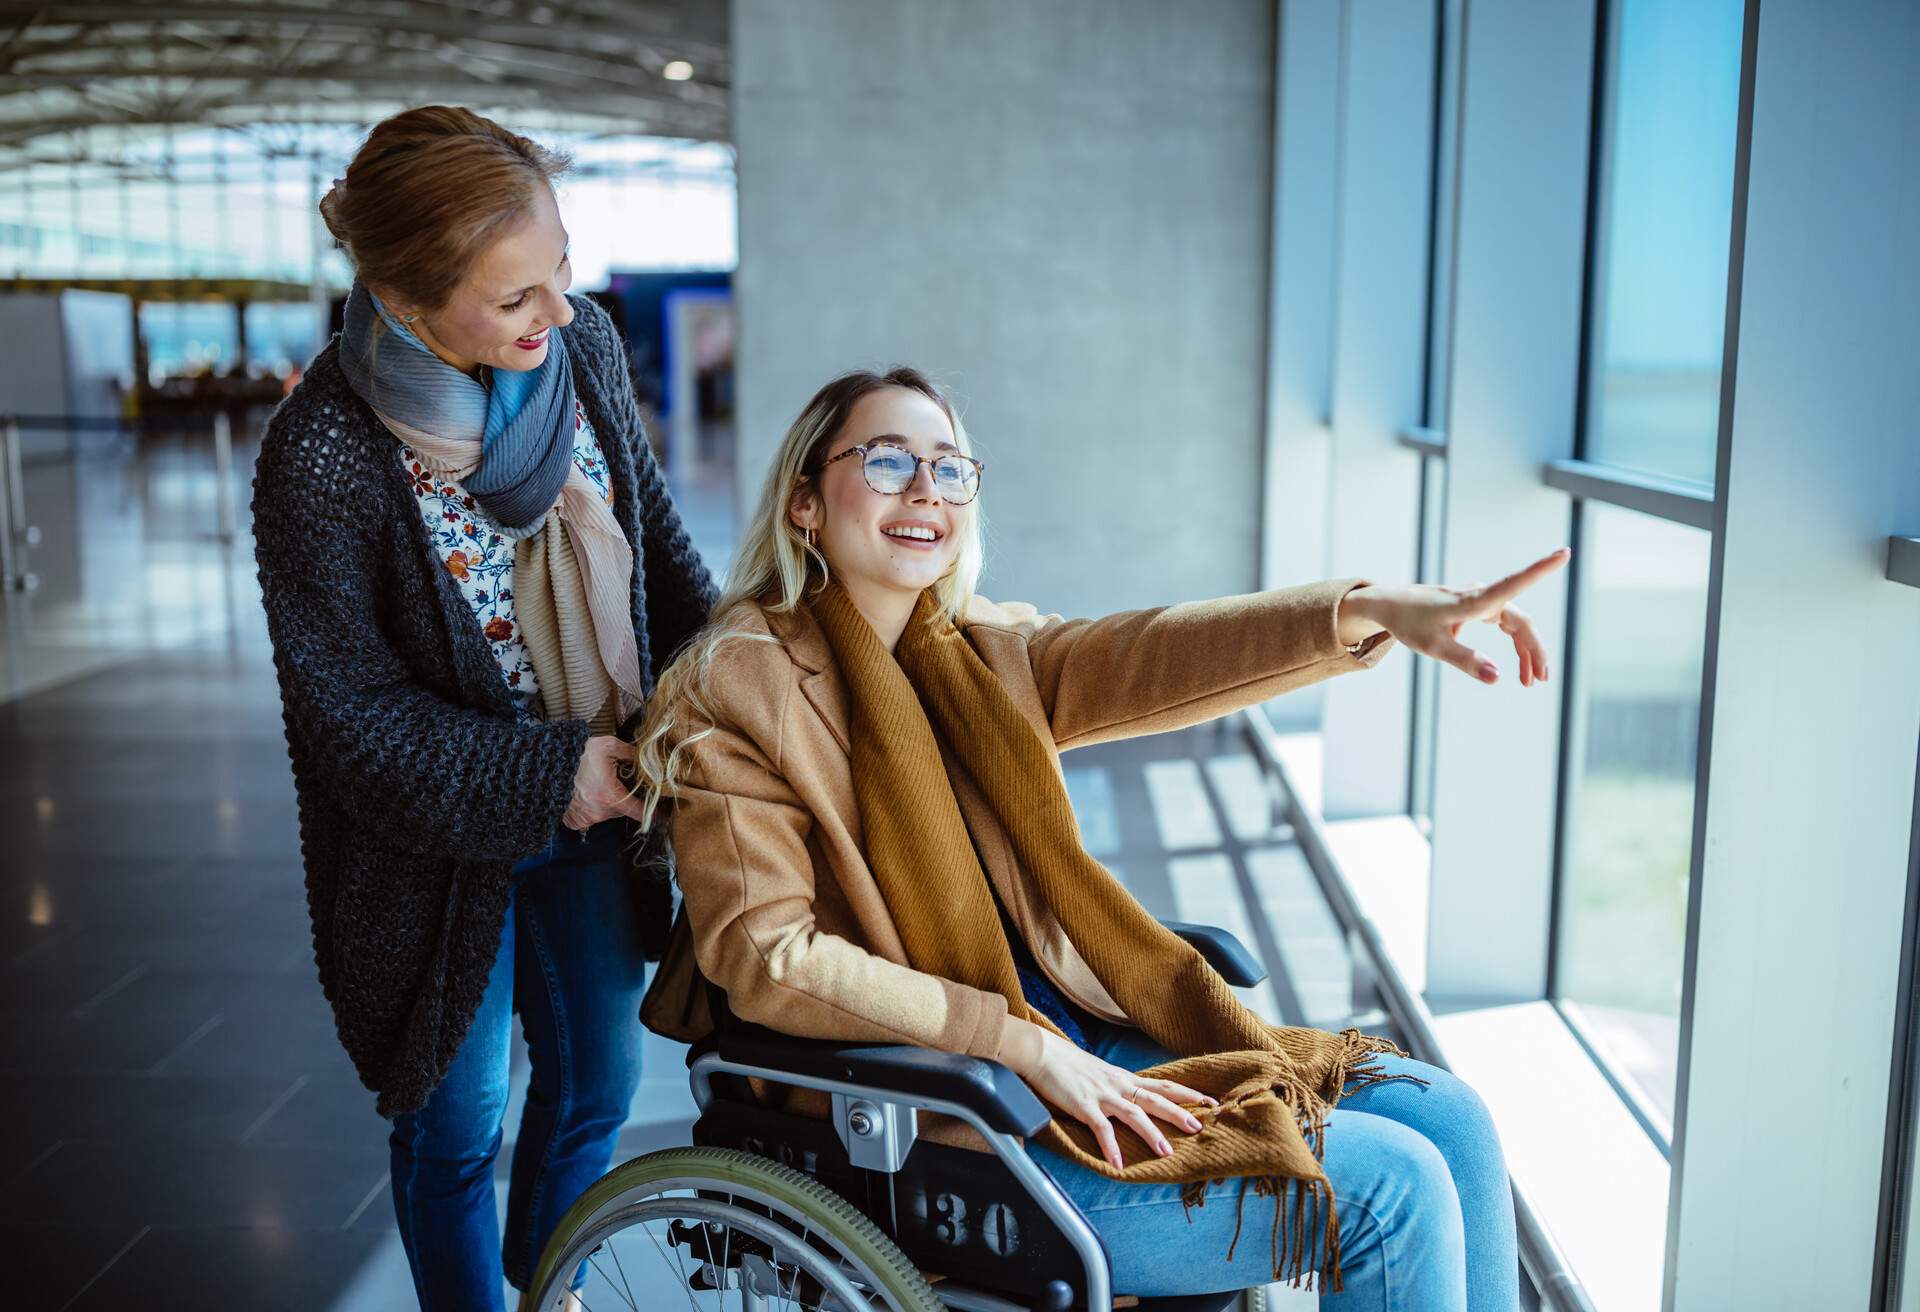 A woman pushes a young woman sitting in a wheelchair inside an airport terminal.